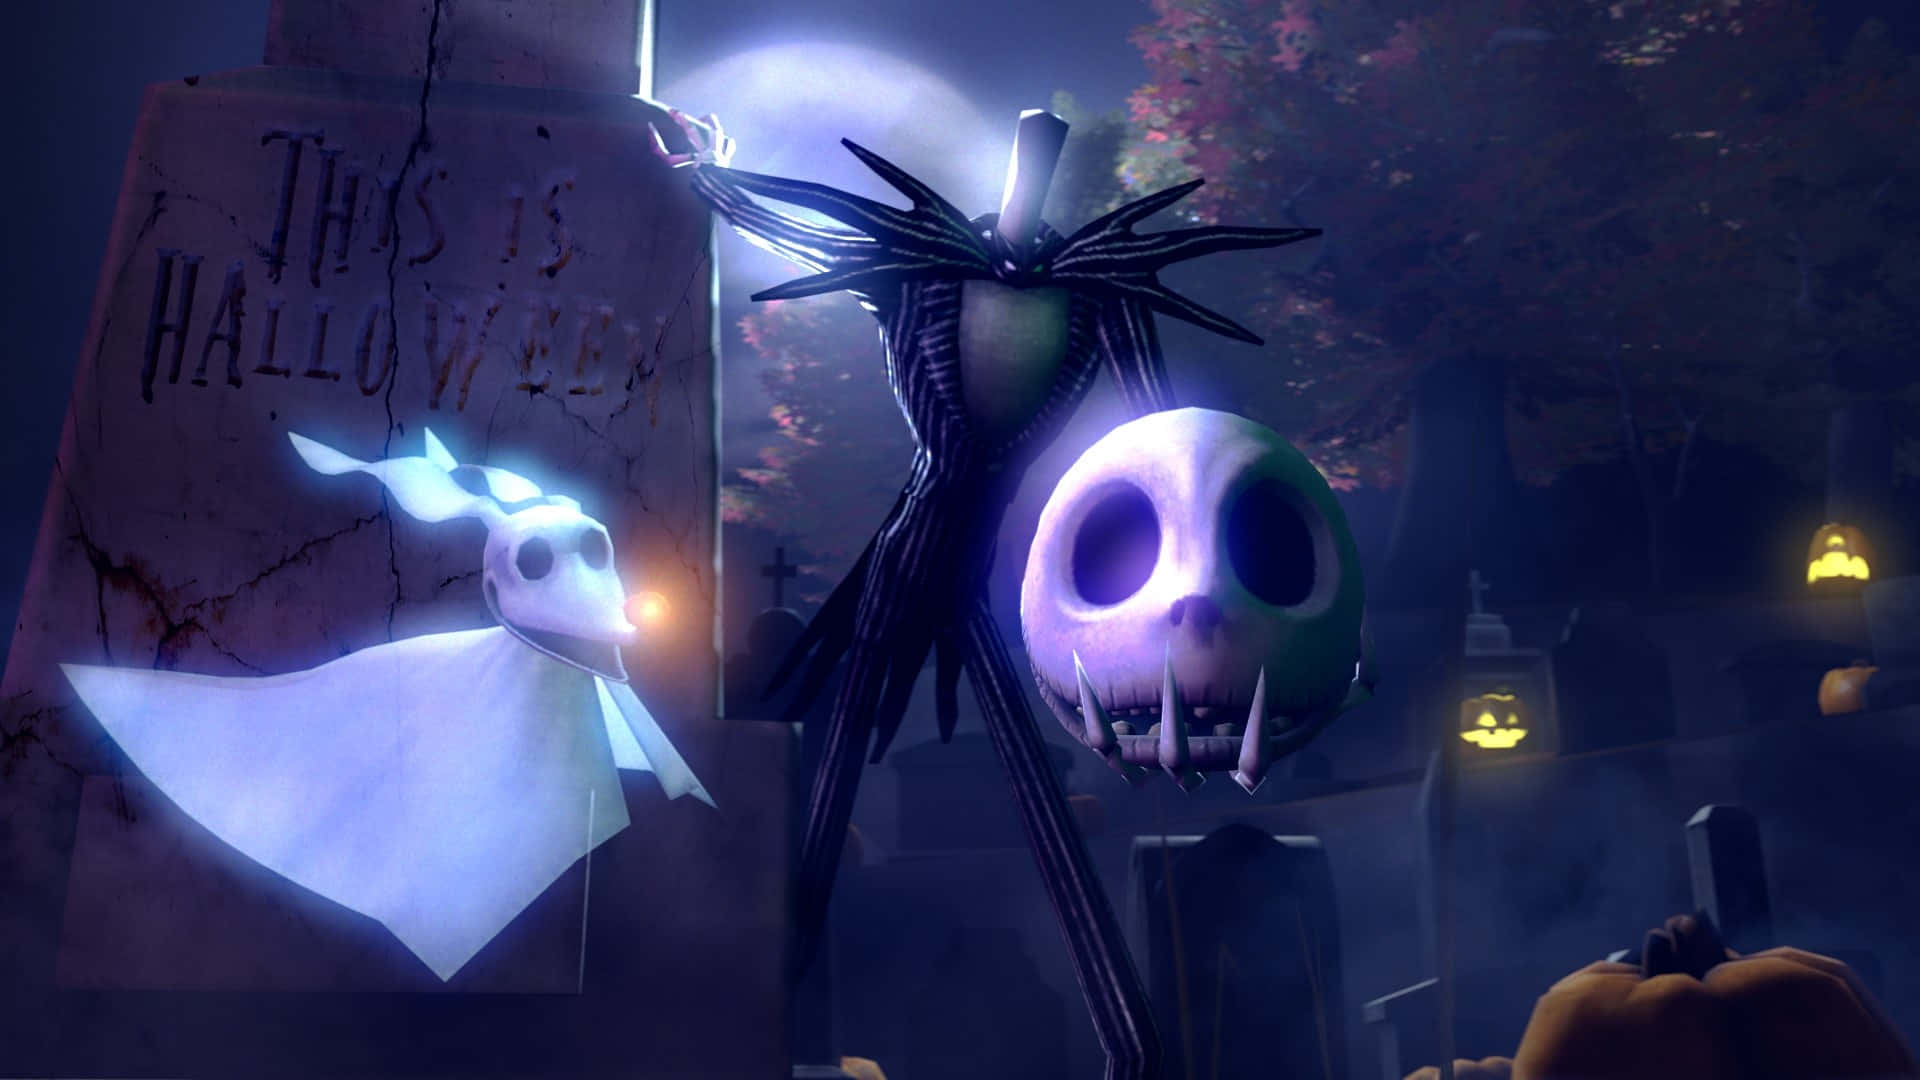 Get ready to scream to the sky with Jack Skellington!